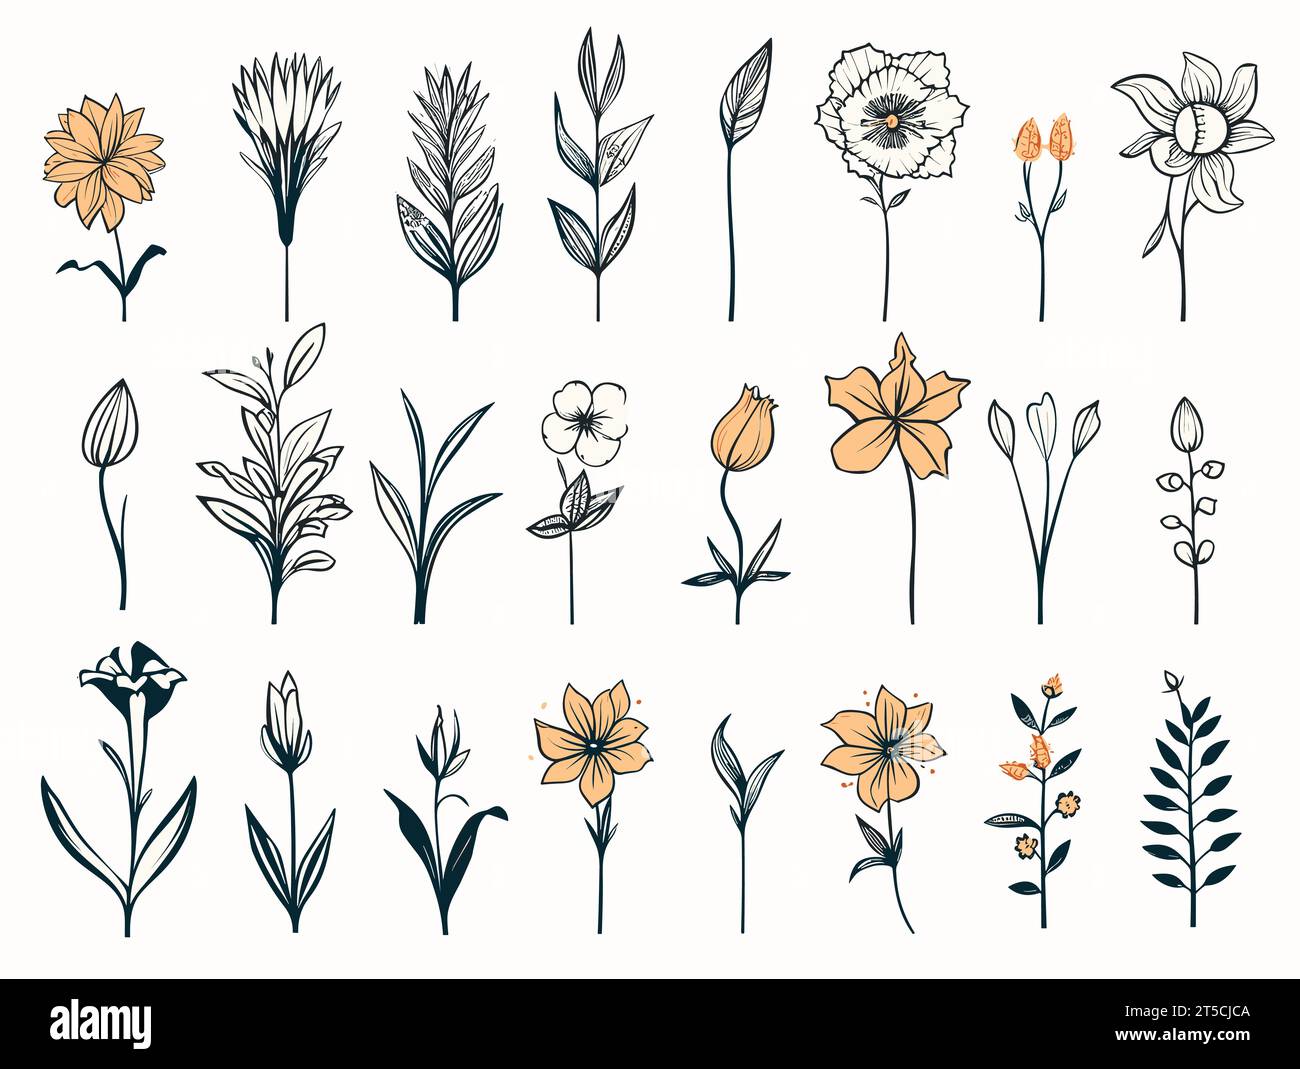 Drawing of Set of vector flower icons illustration separated, sweeping overdrawn lines. Stock Vector